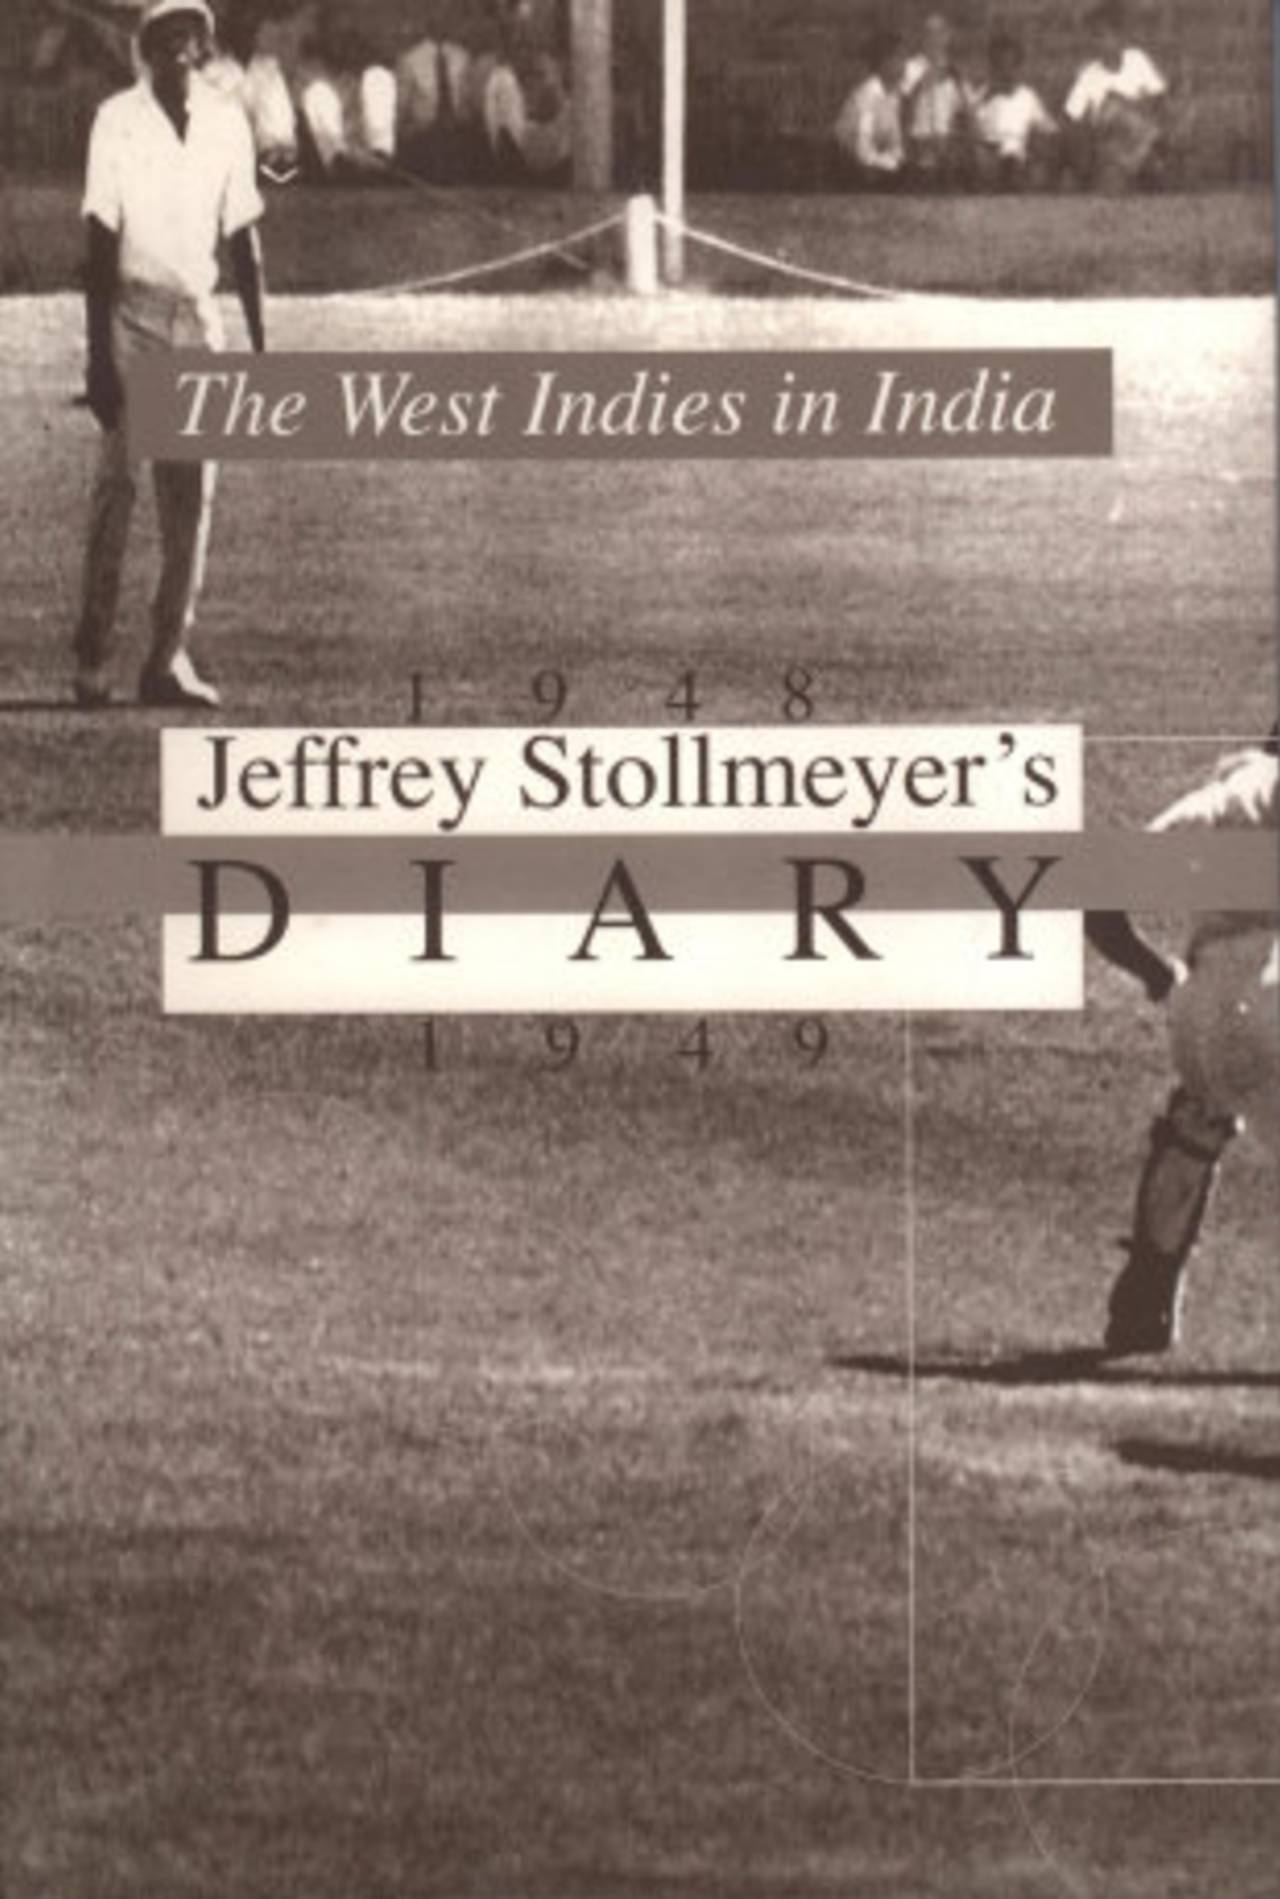 The cover of The West Indies in India, 1948-1949, Jeffrey Stollmeyer's Diary, June 8, 2013